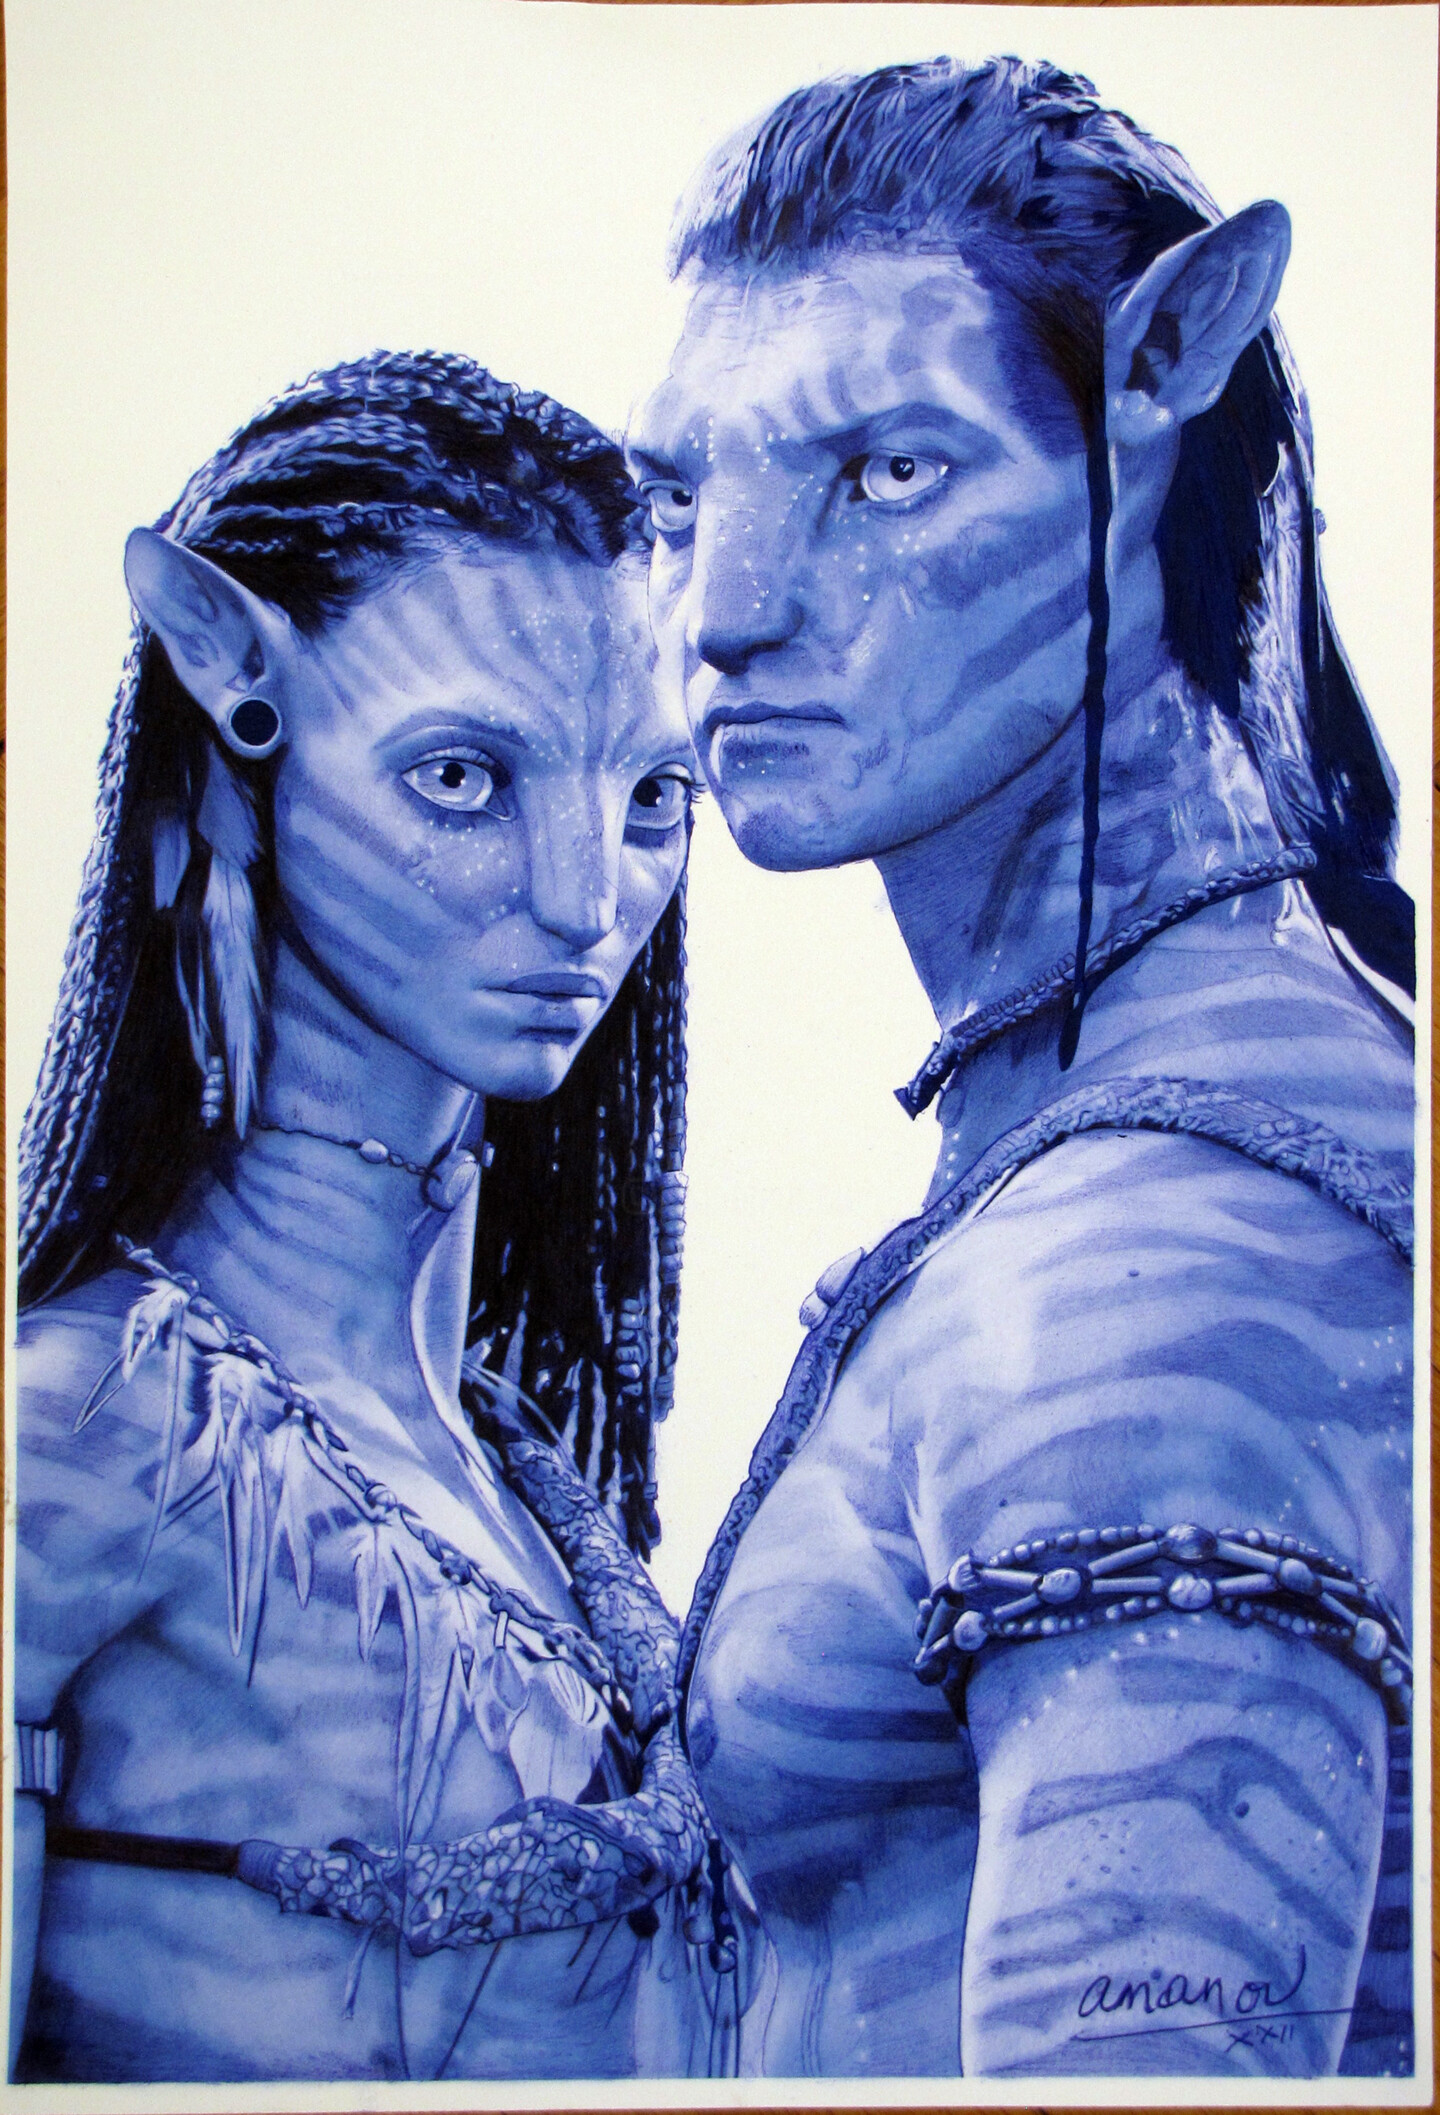 You dont dream in cryo  James Horner  Avatar OST 2009  James Horner   Playlist NhacCuaTui